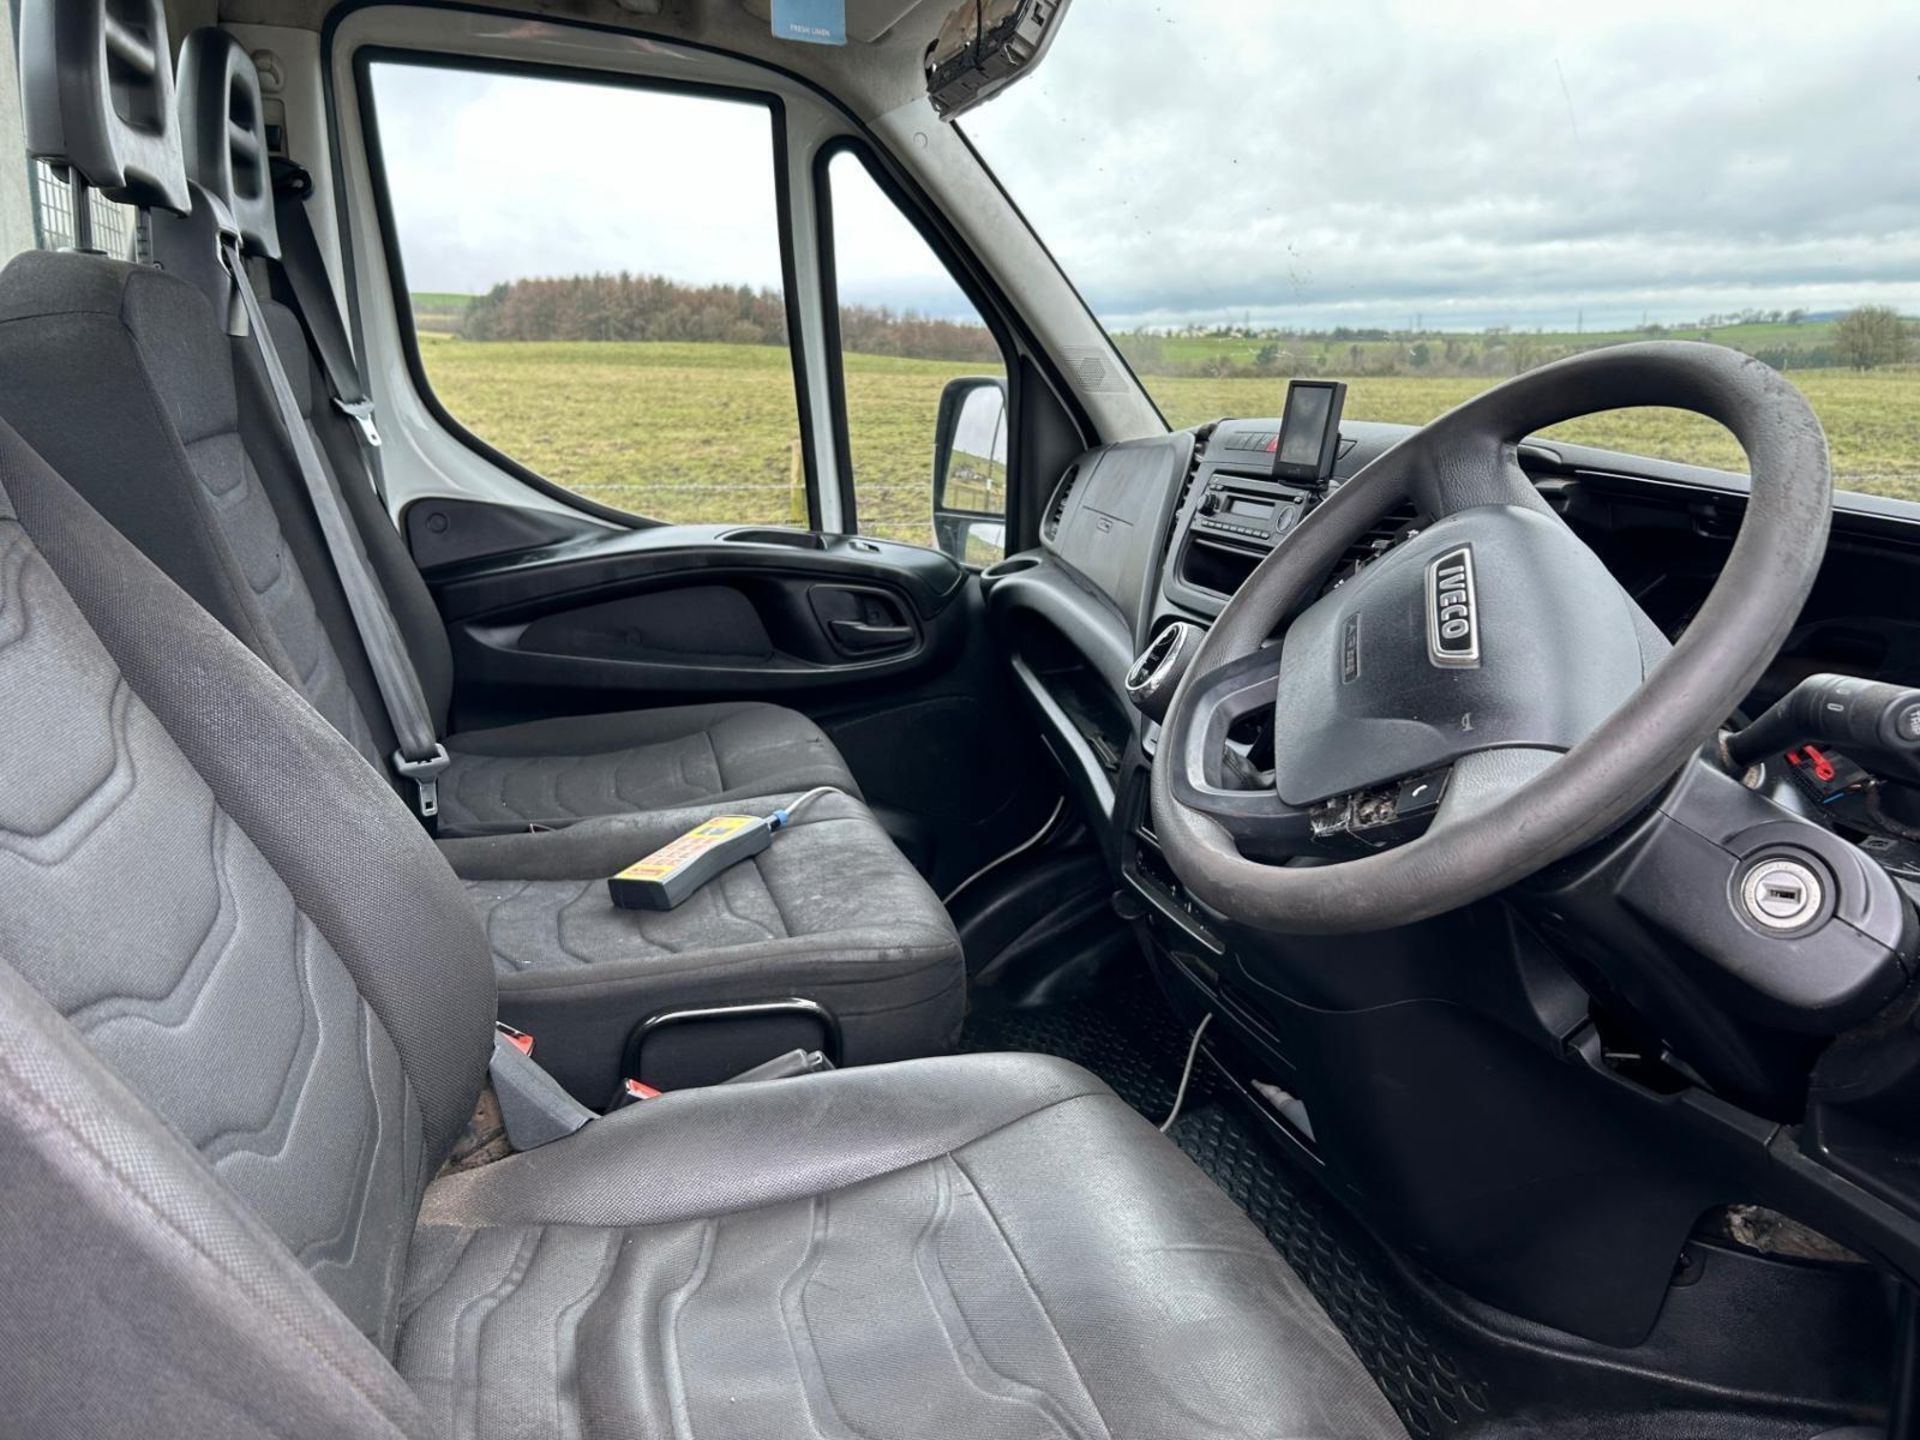 2018 IVECO DAILY -230K MILES - HPI CLEAR - GET BIDDING NOW!! - Image 5 of 11